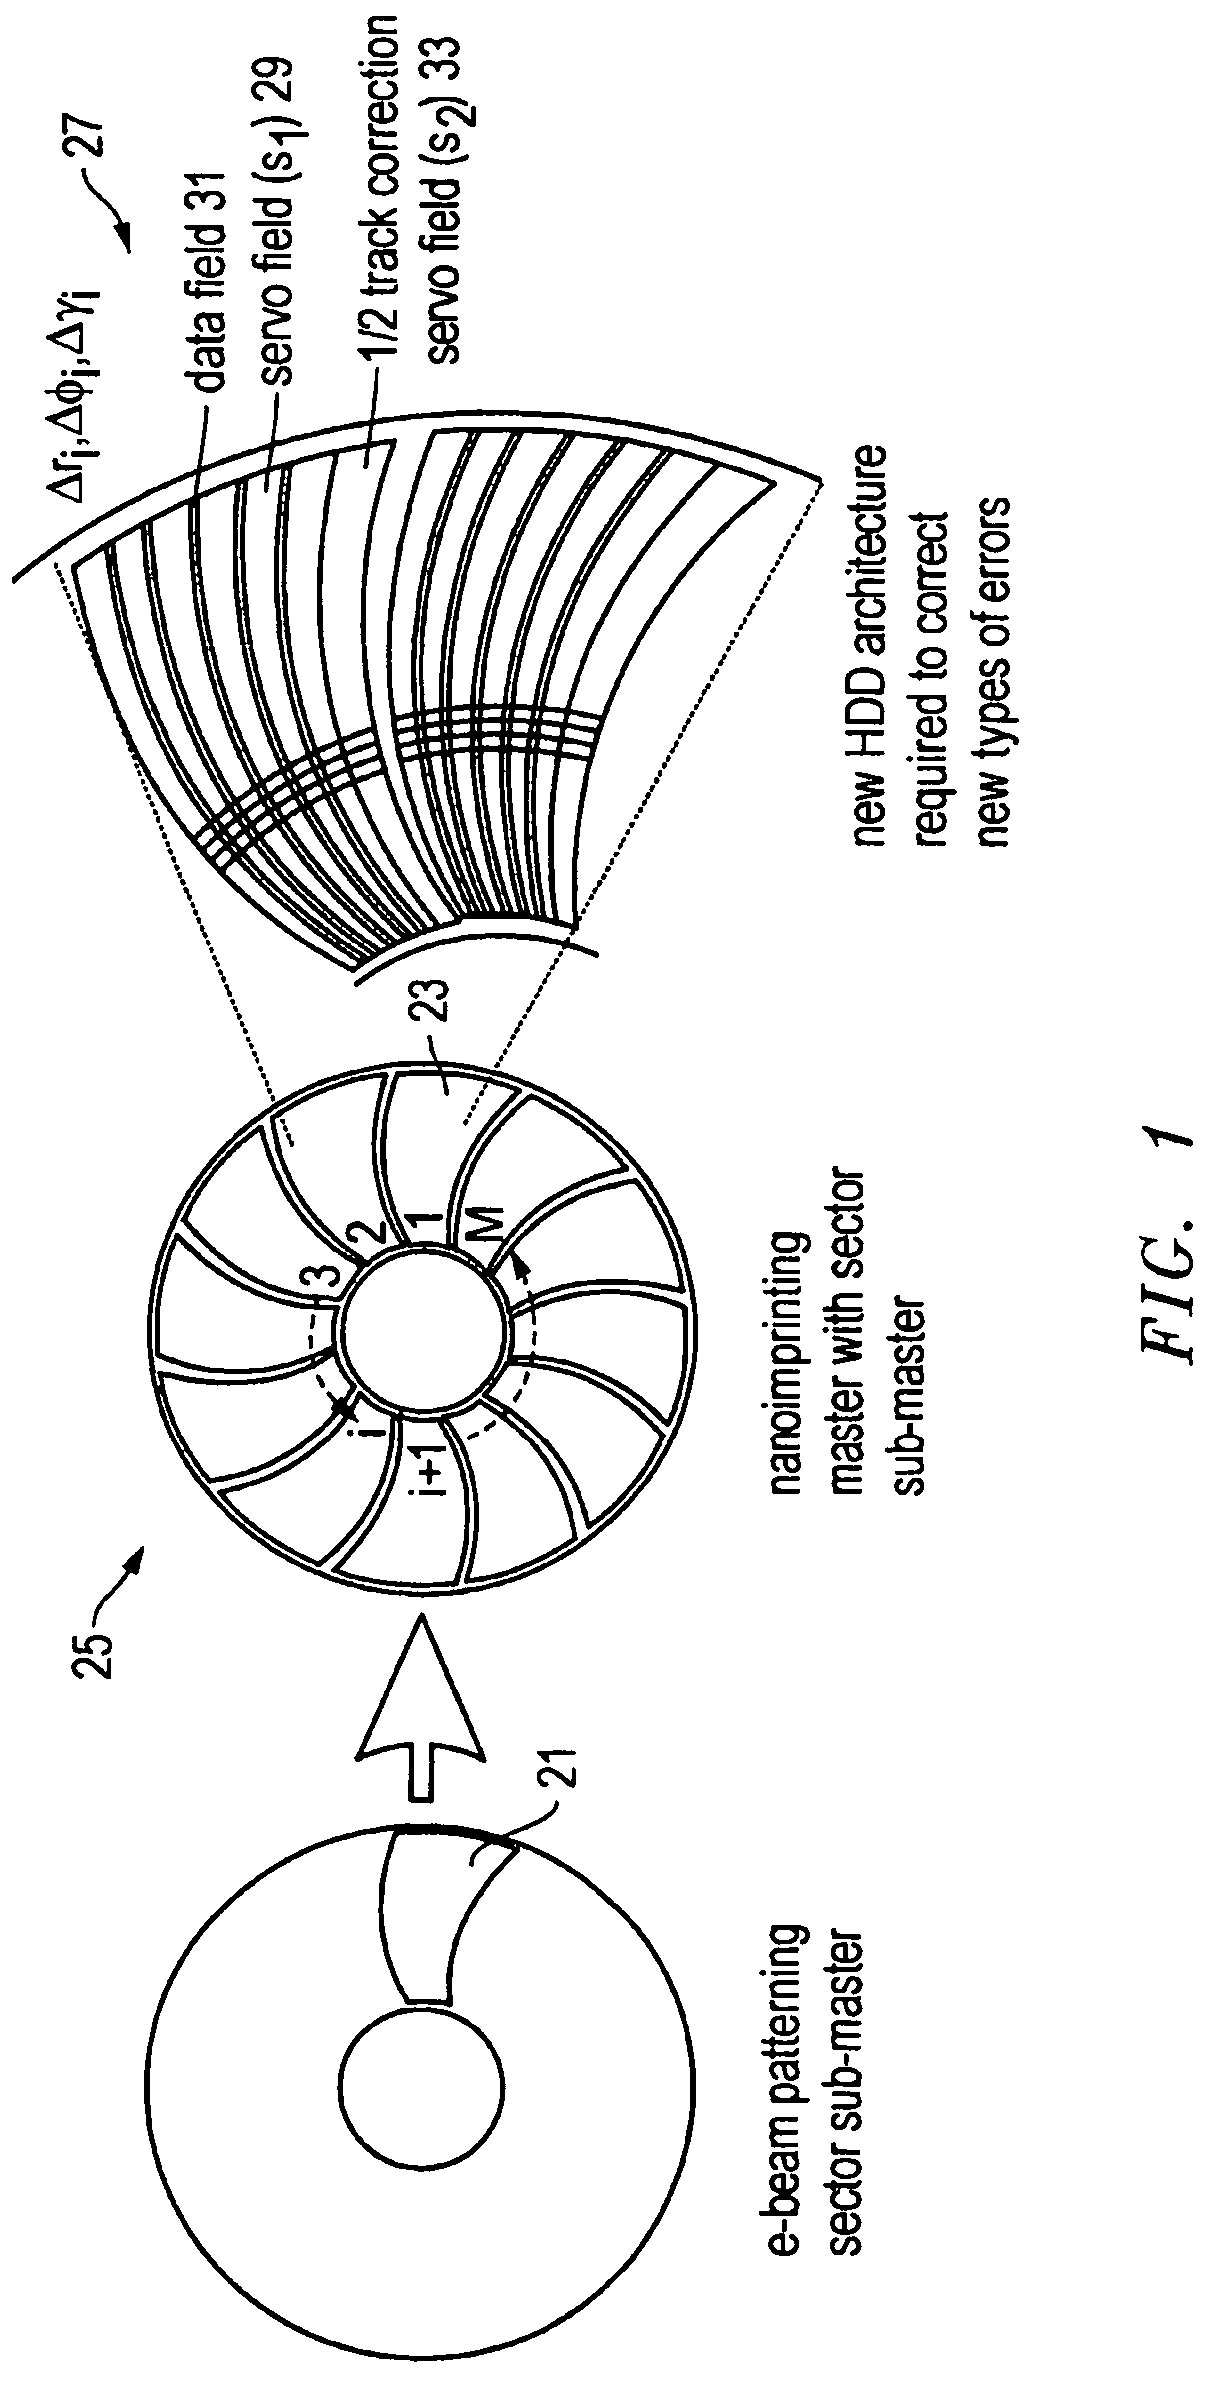 System, method, and apparatus for forming a patterned media disk and related disk drive architecture for head positioning